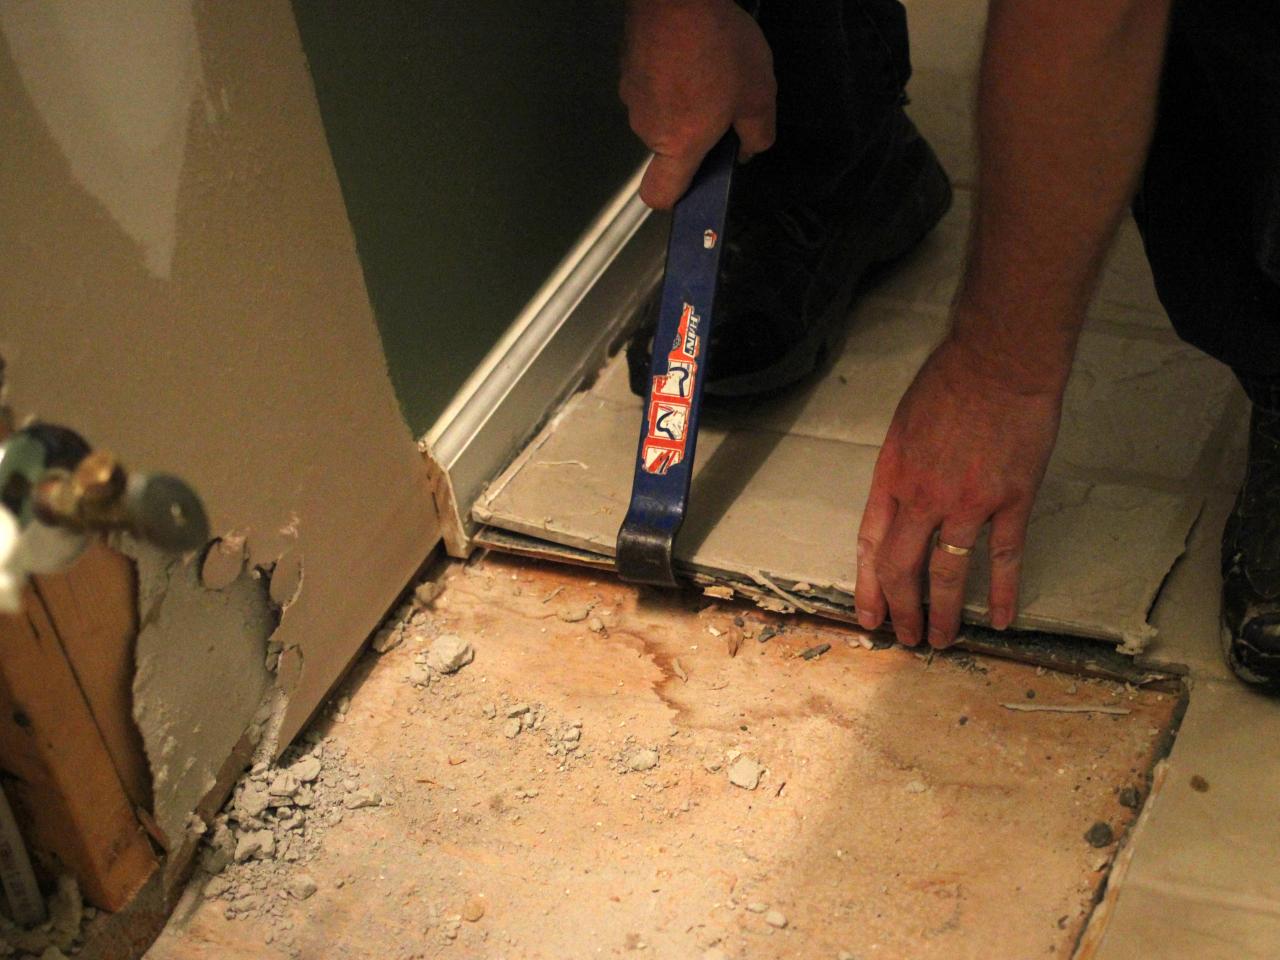 How To Remove A Tile Floor, How To Remove Ceramic Tile From Basement Floor